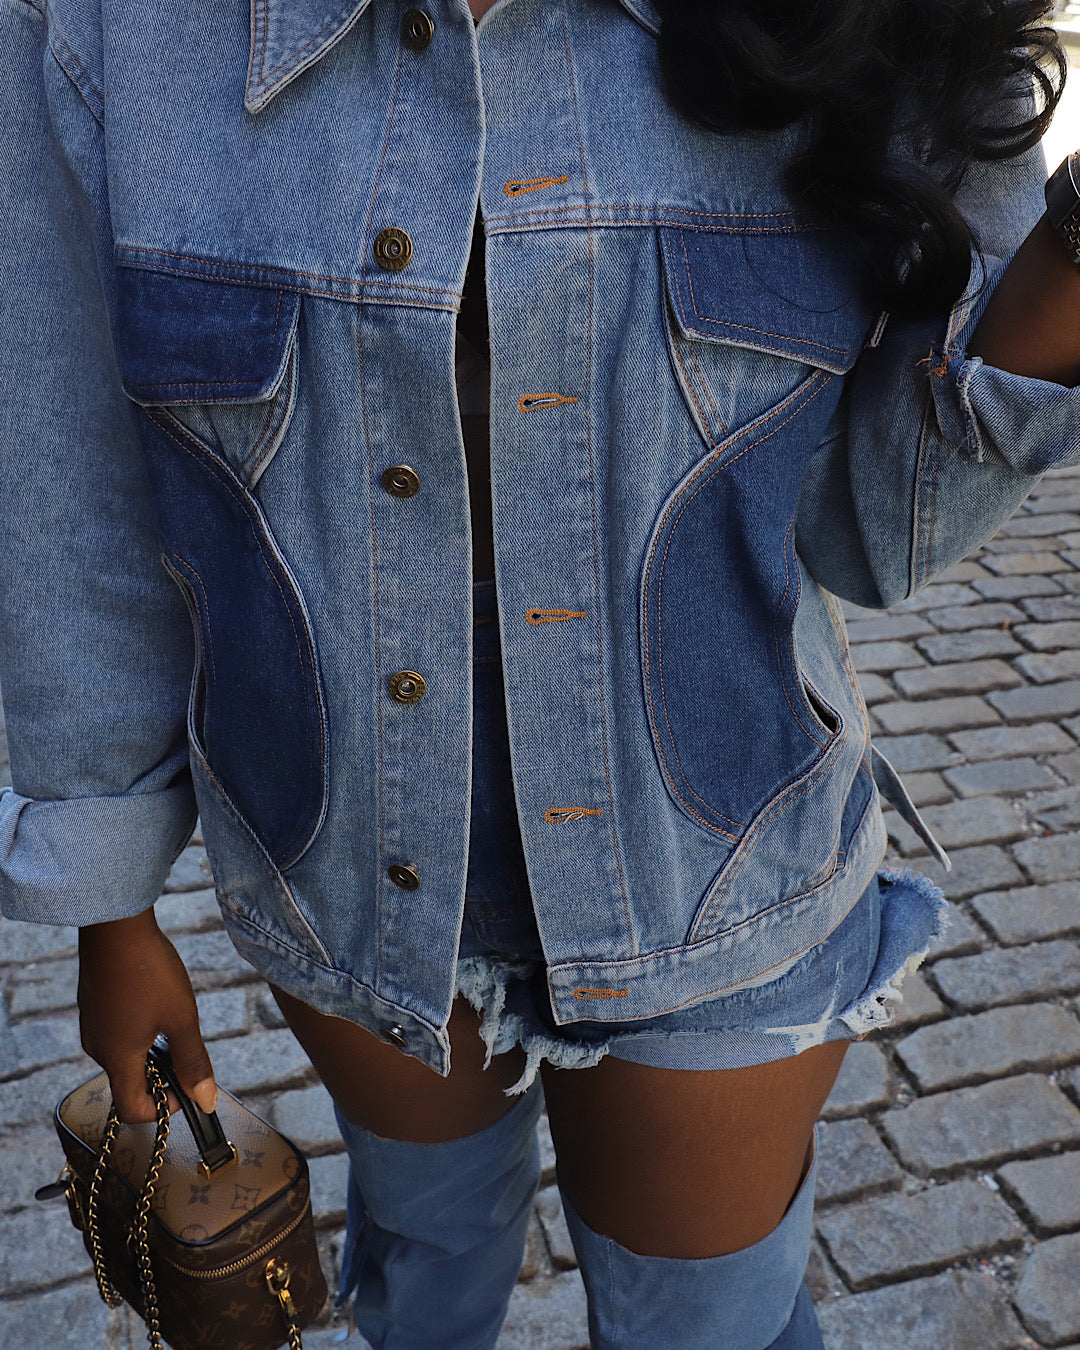 The Runway Cut out Denim Jacket( Pre Order ships 10/15-10/31